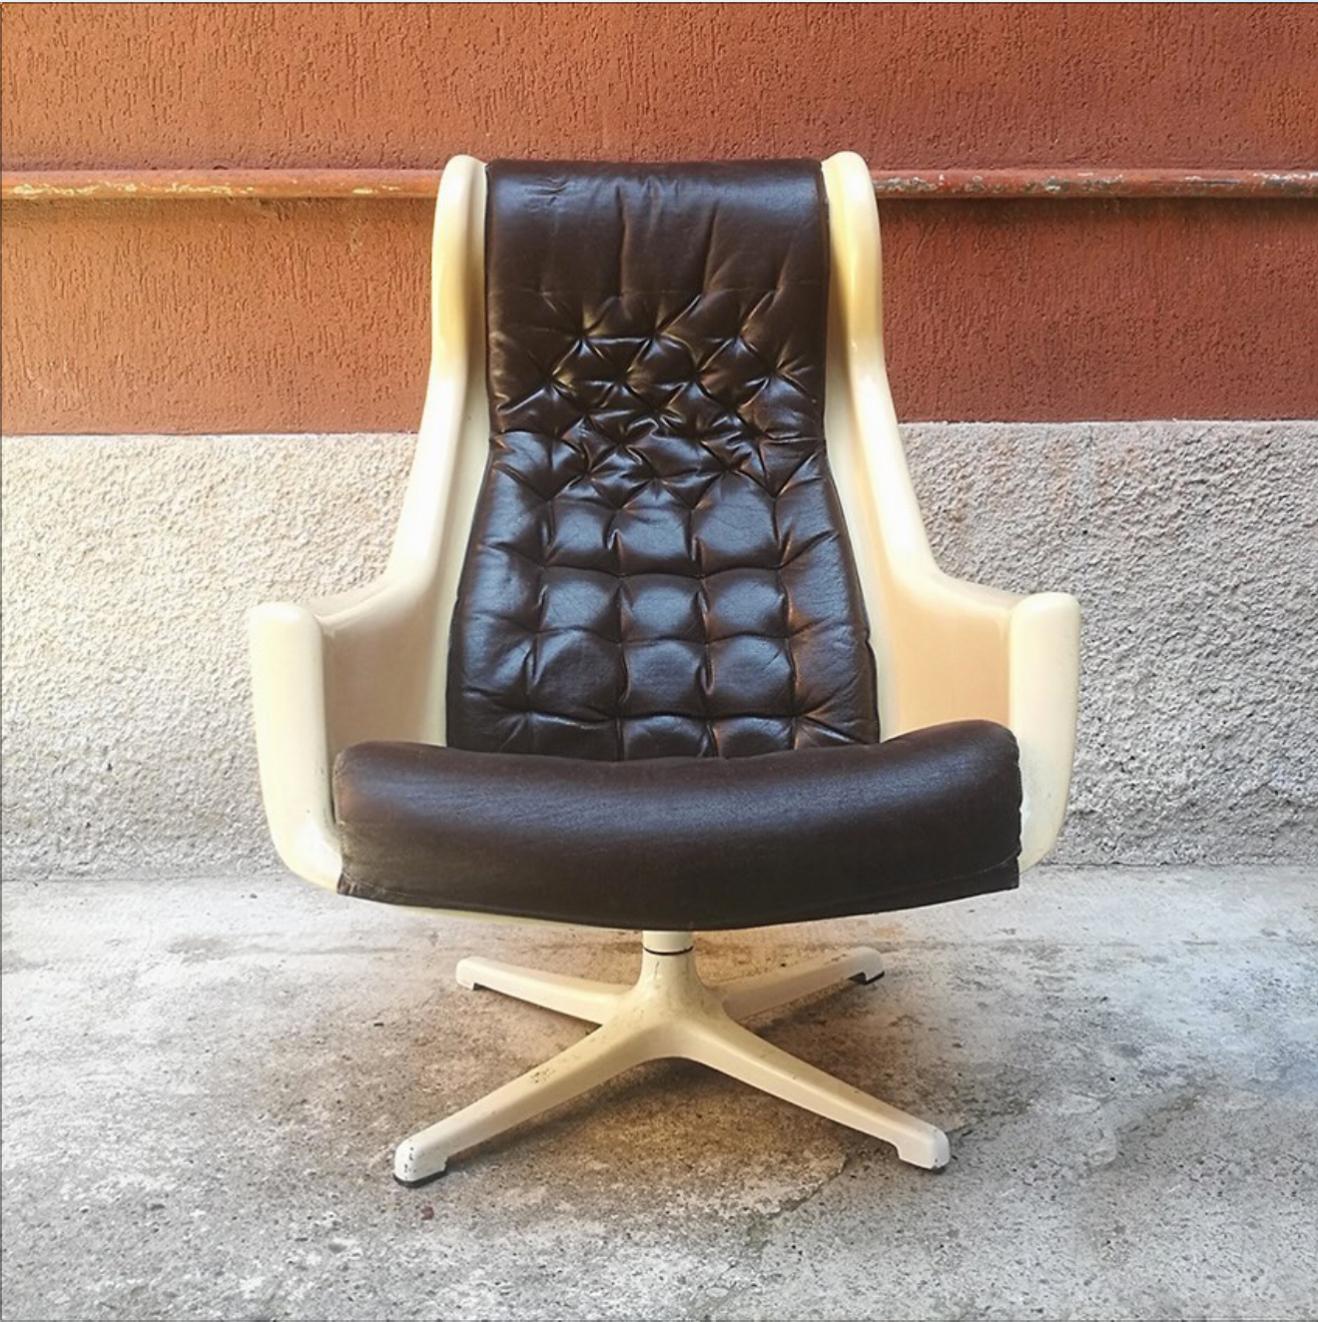 Swedes mid-century modern Space Age Armchair Galaxy by Alf Svensson for Dux 1968
Amazing and very rare Space Age armchairs from 1970 period.
The seating is in leather and the cover is in plastic white.
Base is in aluminum fusion, white painted and